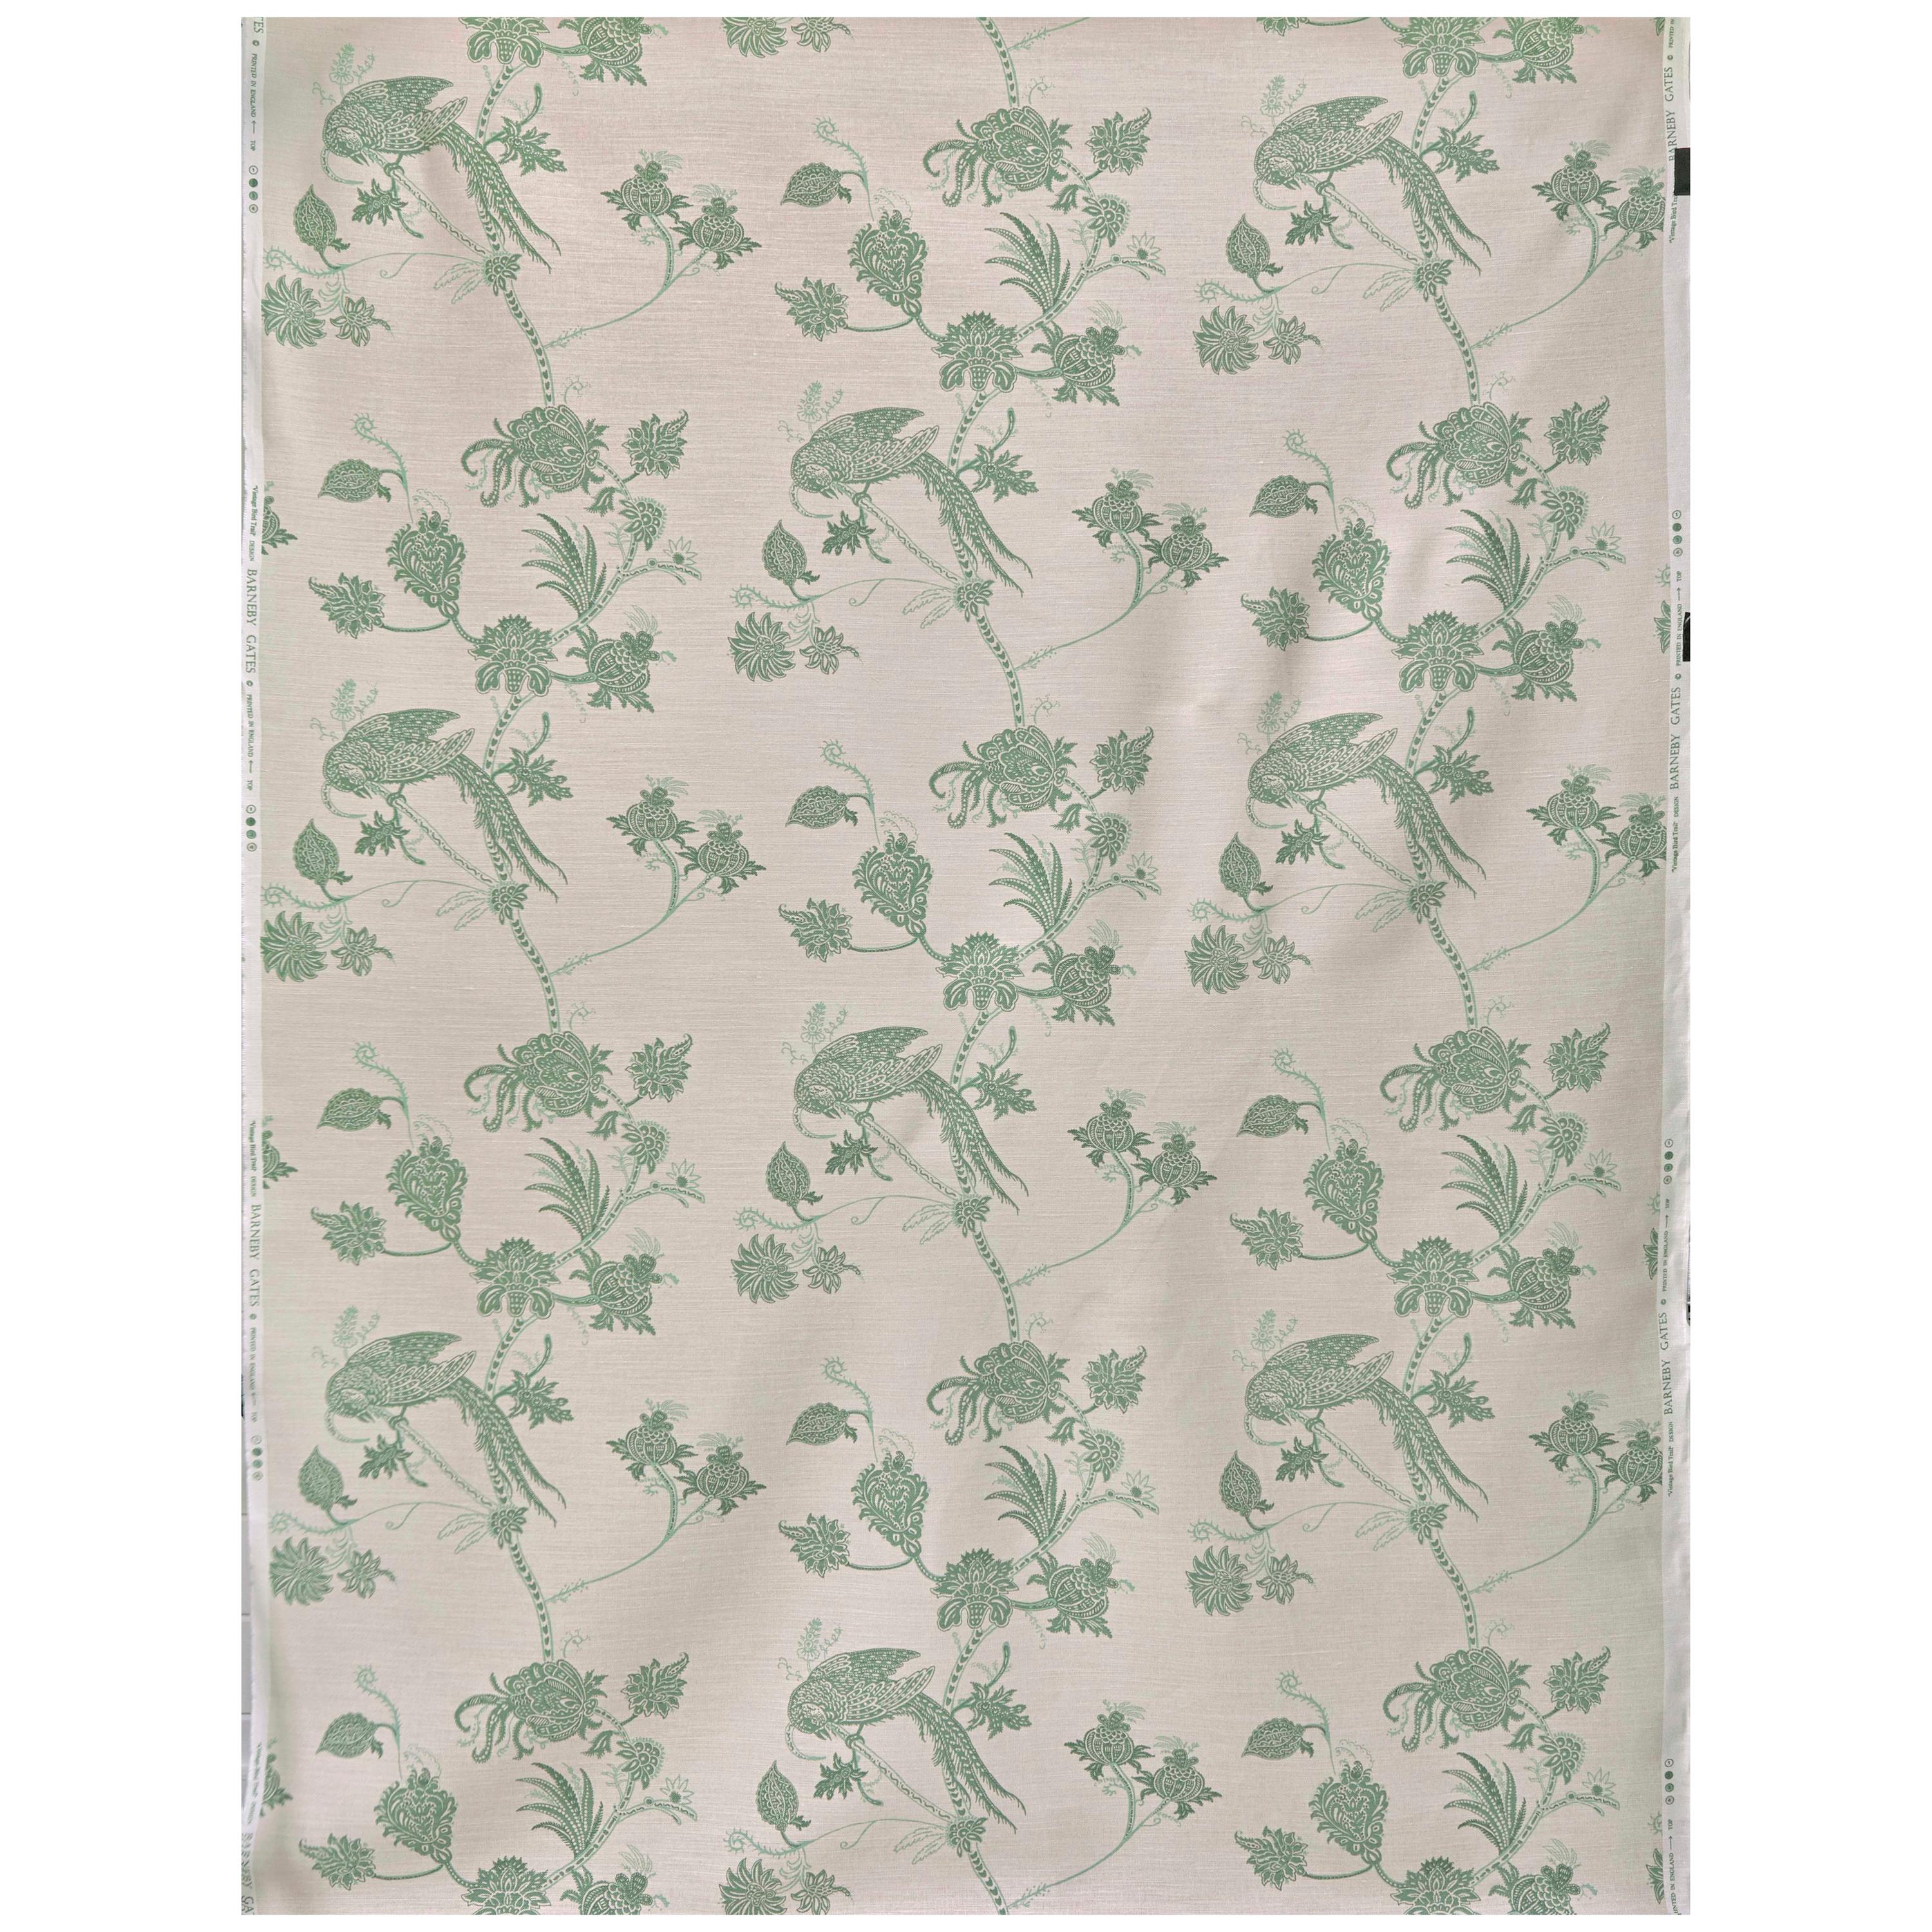 'Vintage Bird Trail' Contemporary, Traditional Fabric in Plaster/Green For Sale